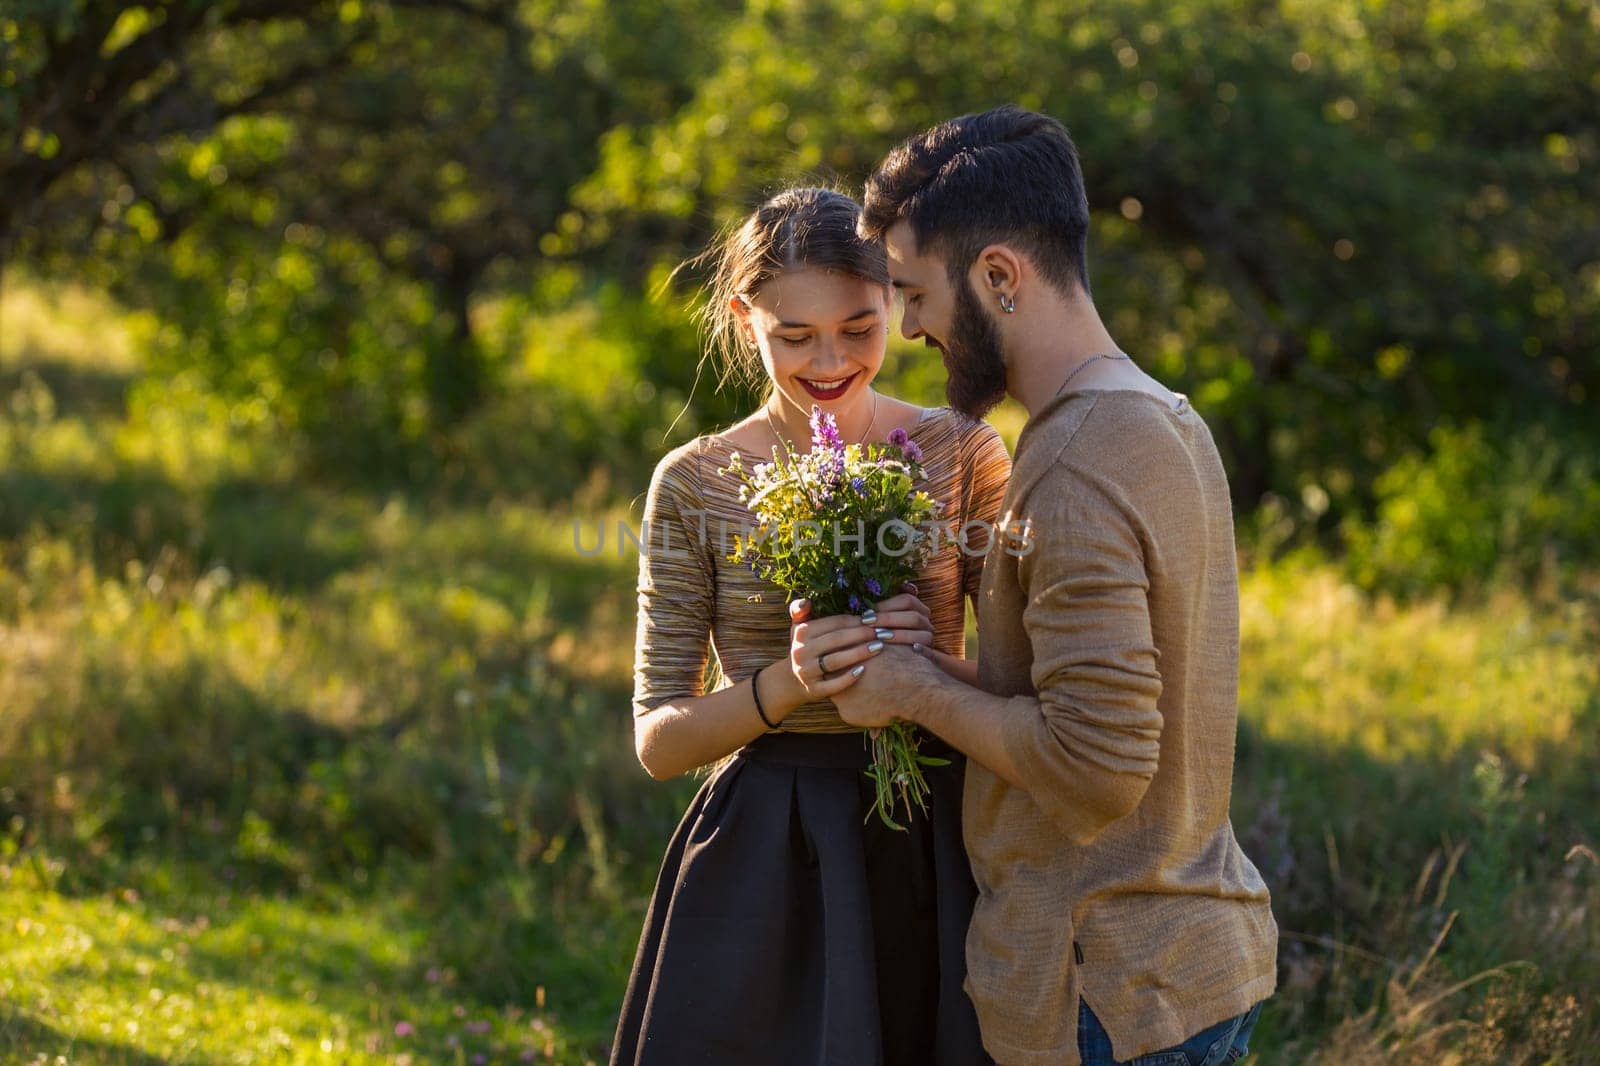 guy gives flowers to his girlfriend by zokov